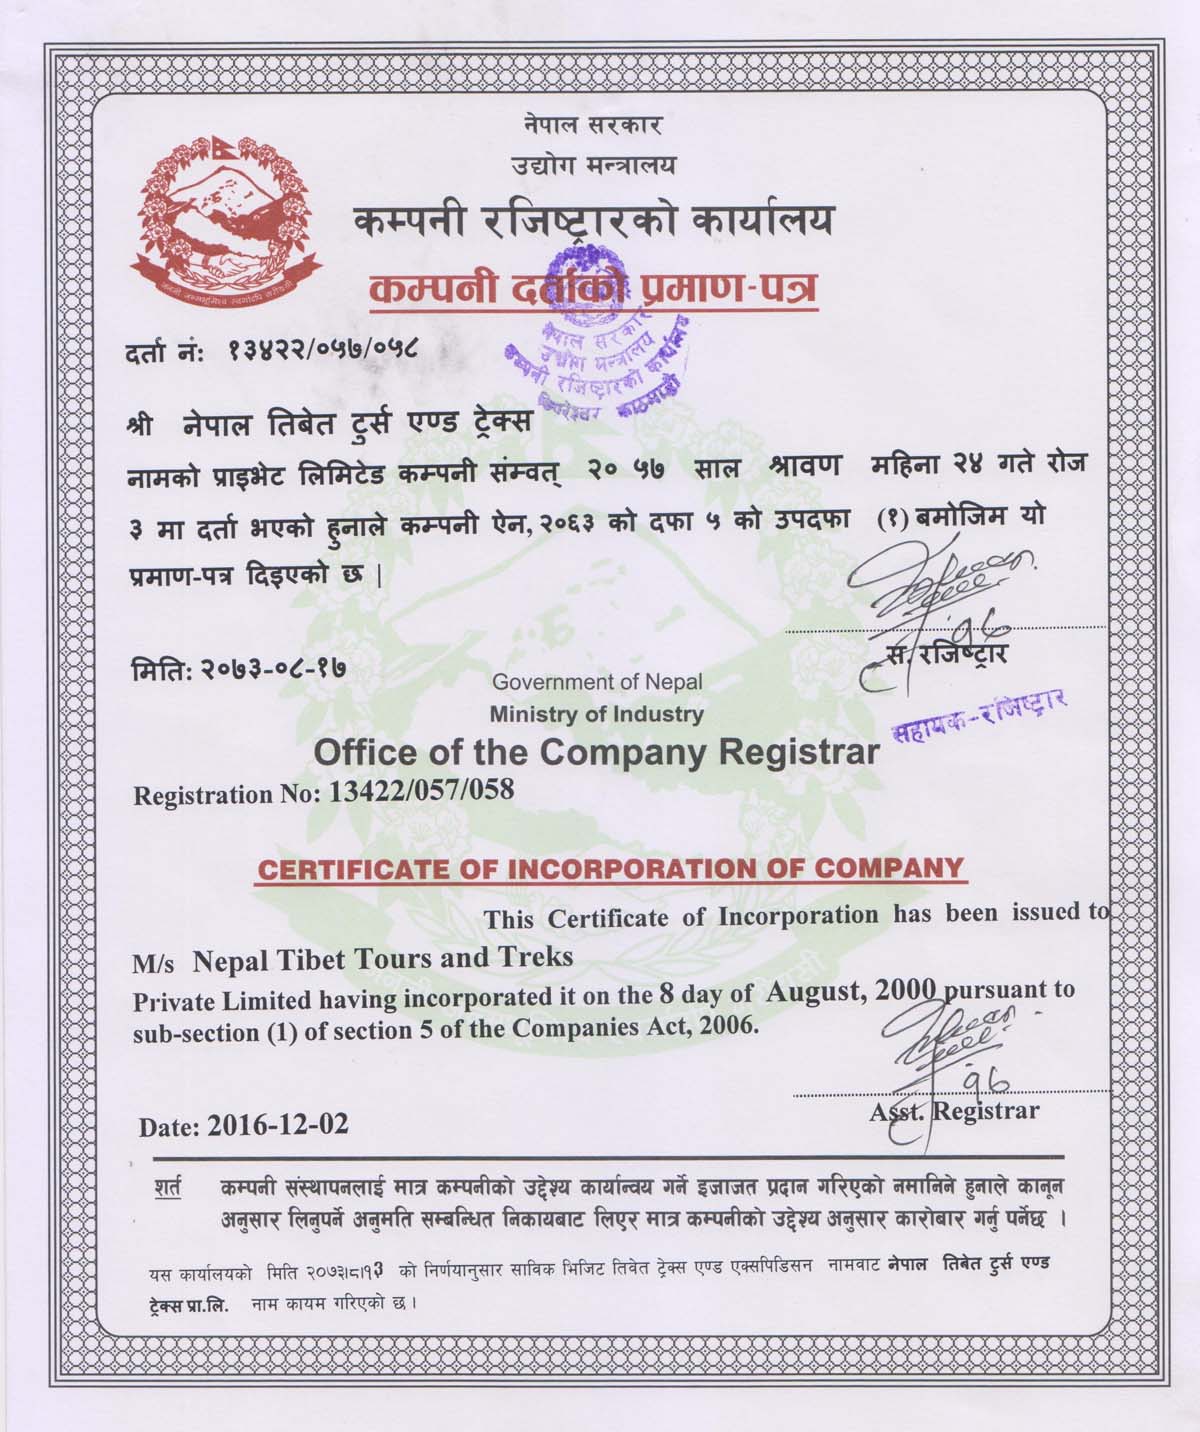 Certificate of incorporation of company